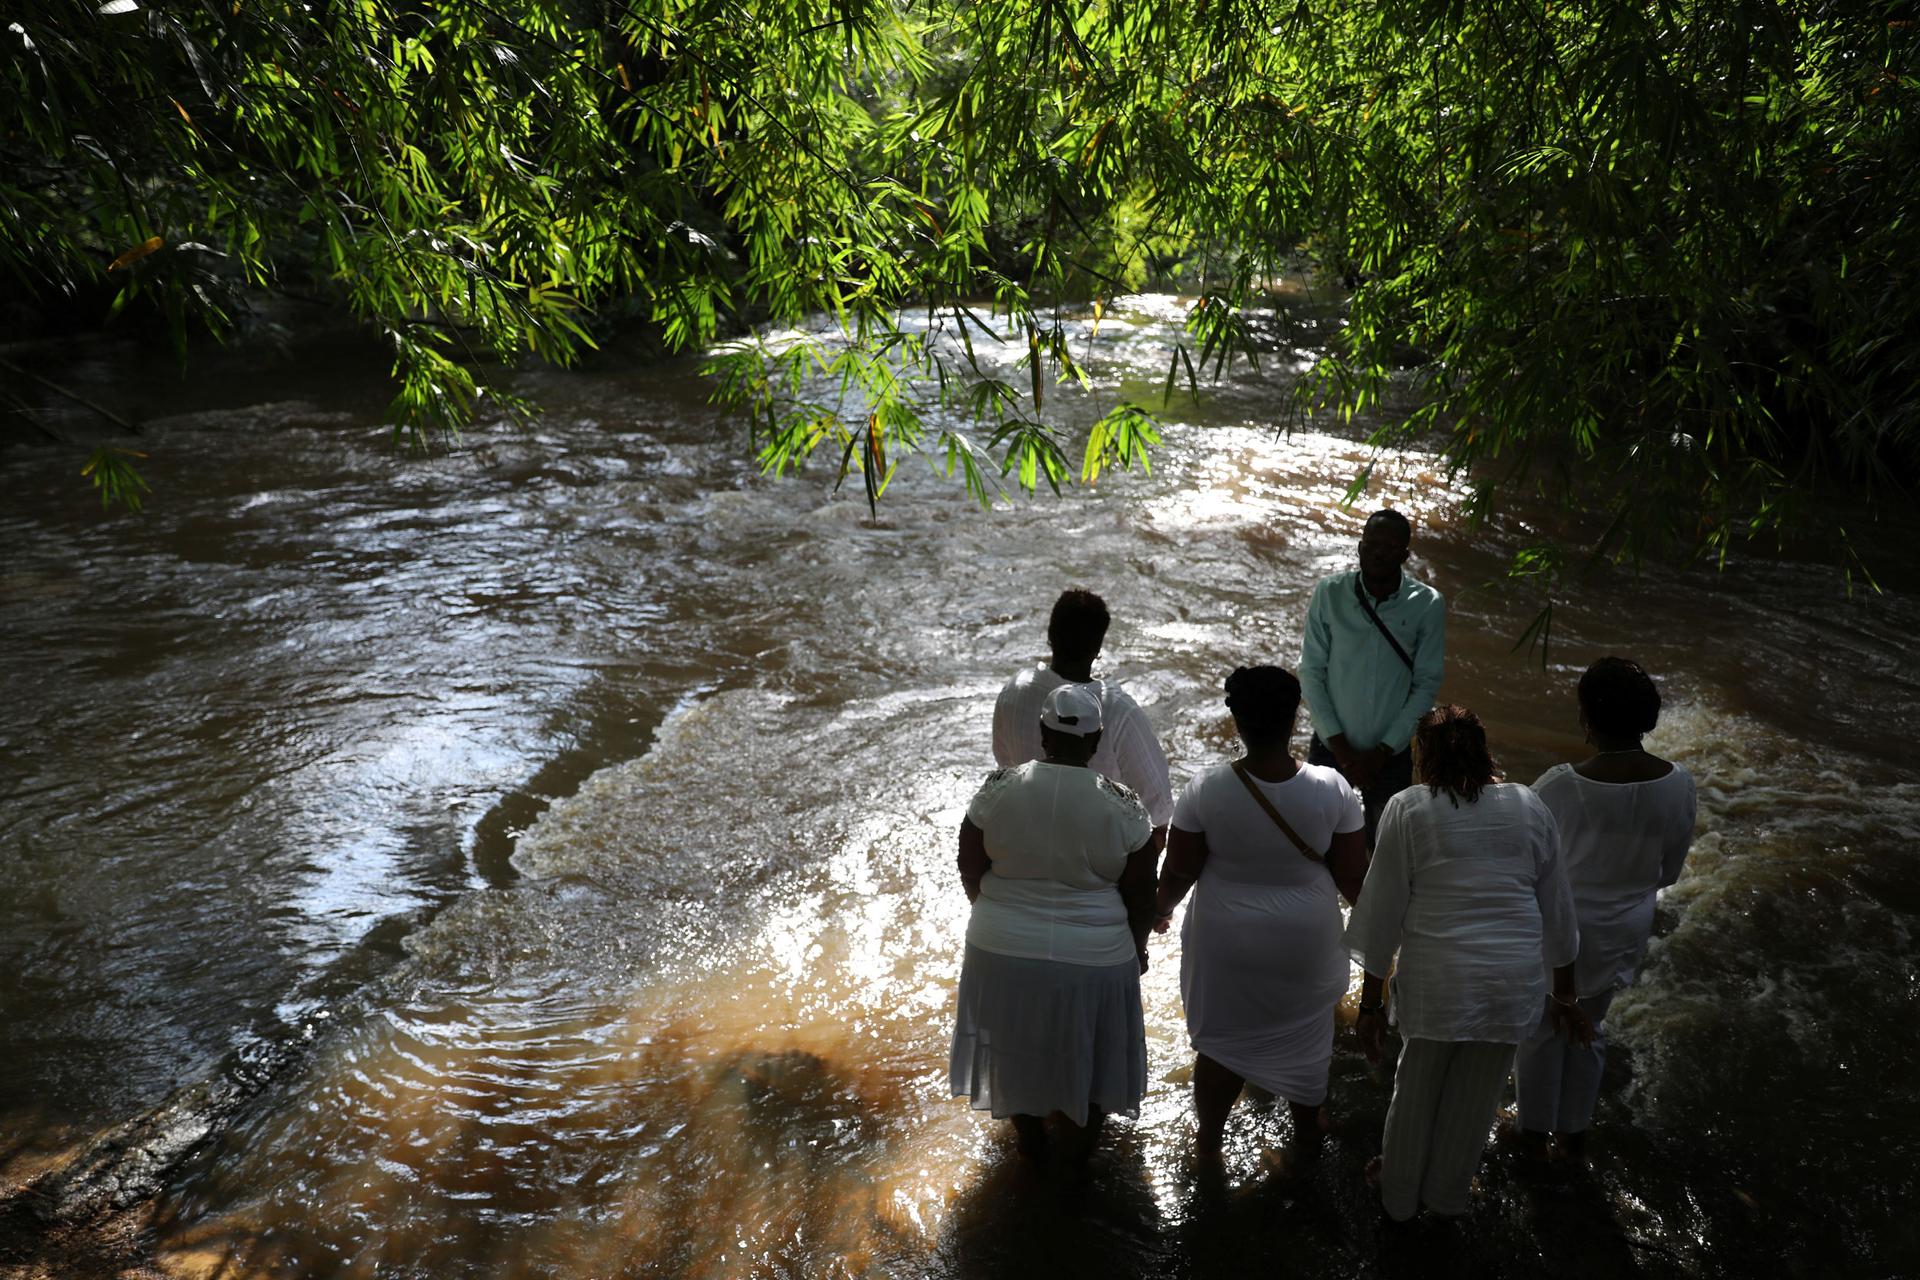 A group of people are shown wearing white and standing ankle deep in a river.